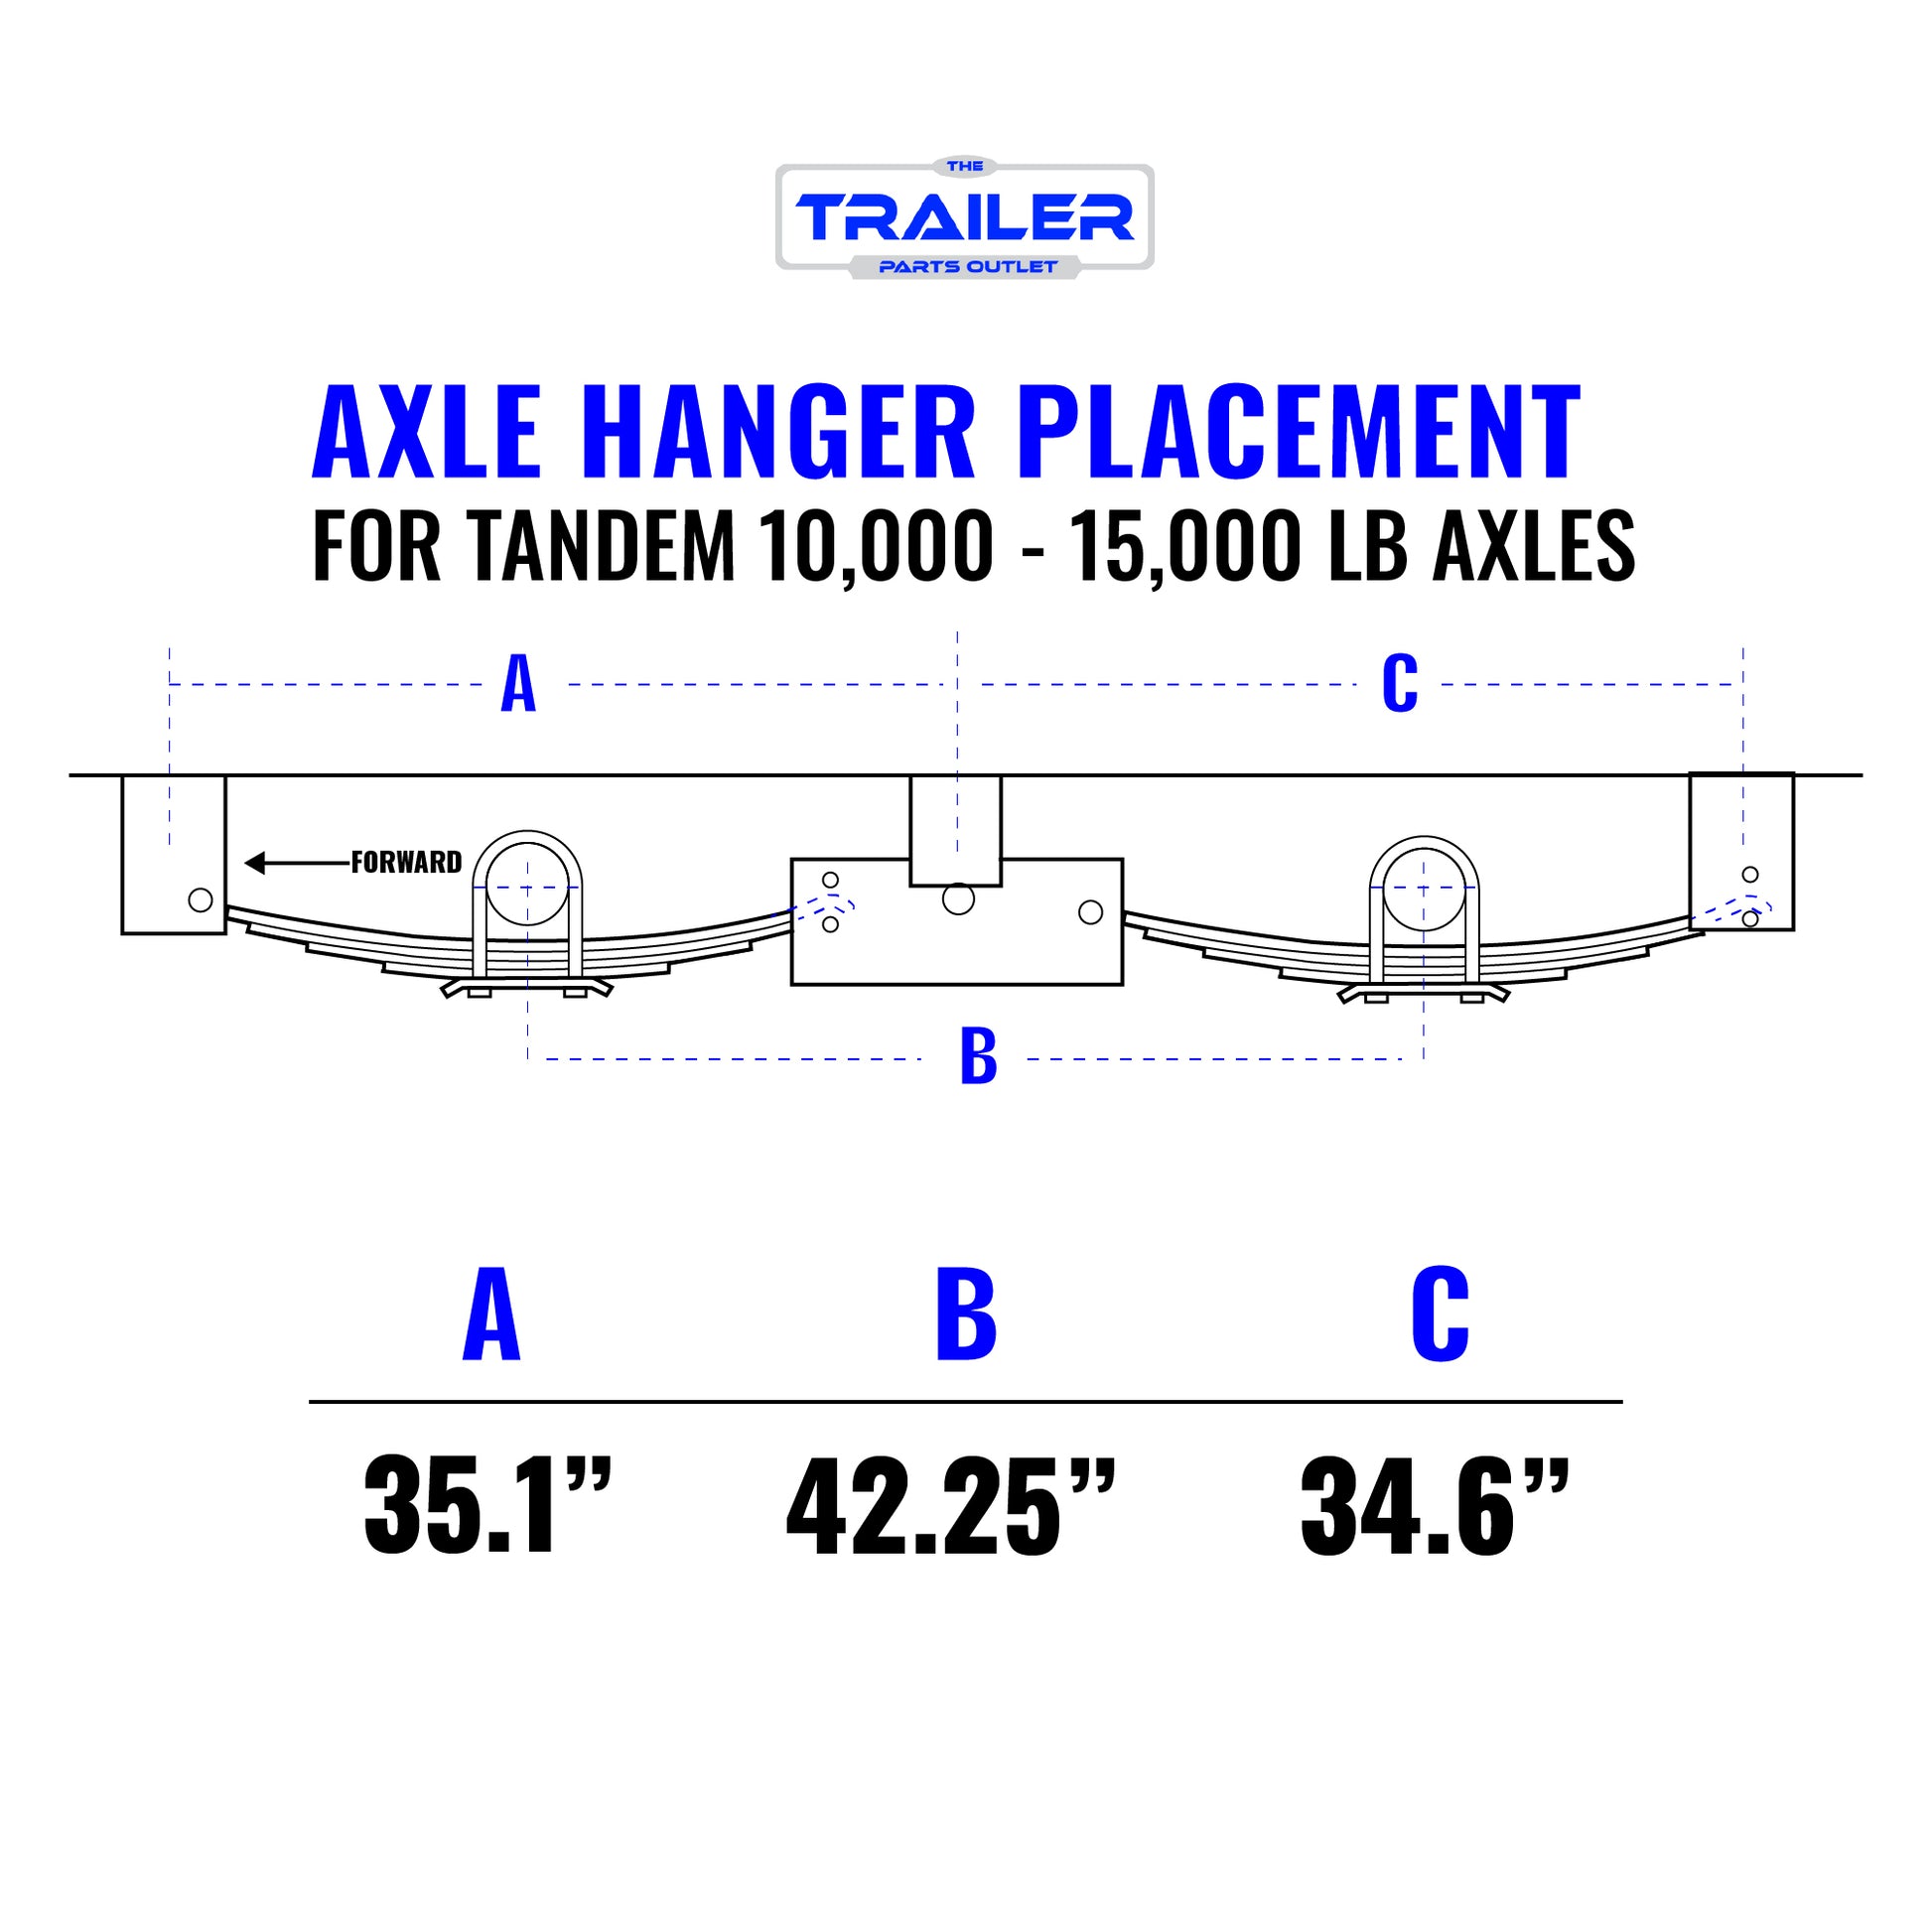 Trailer 5 Leaf Slipper Spring Suspension and Tandem Axle Hanger Kit for 5" Tubes - 10,000 Pound Axles - The Trailer Parts Outlet